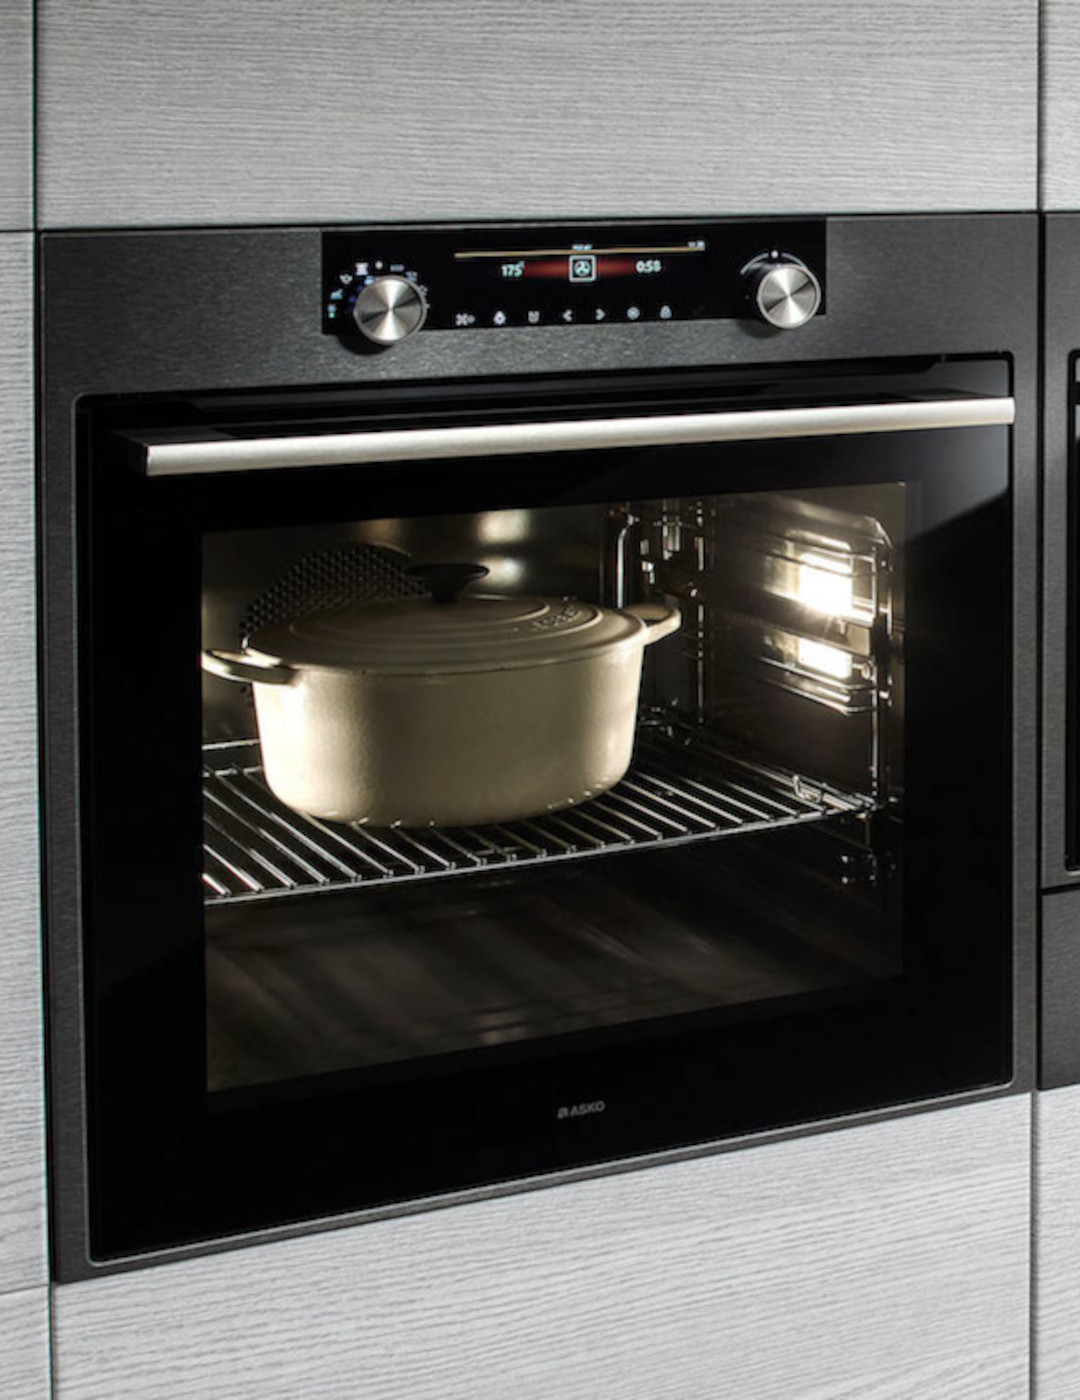 ASKO-Kitchen-Microwave-Ovens-The-next-level-of-microwave-cooking-from-ASKO-Appliances-resized-mobile.jpg